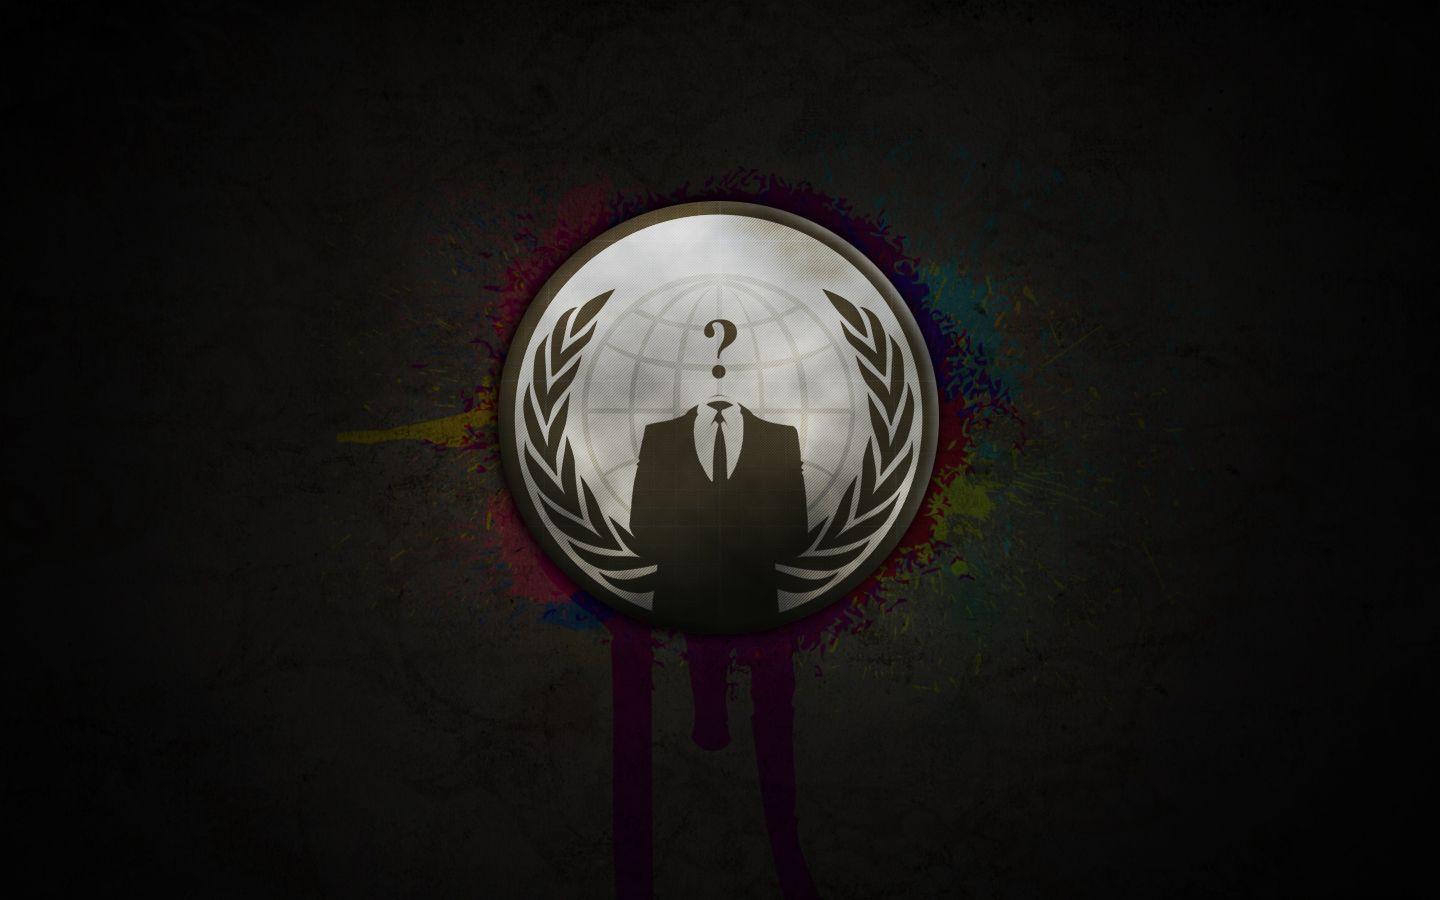 Anonymous Wallpaper, Picture, Image